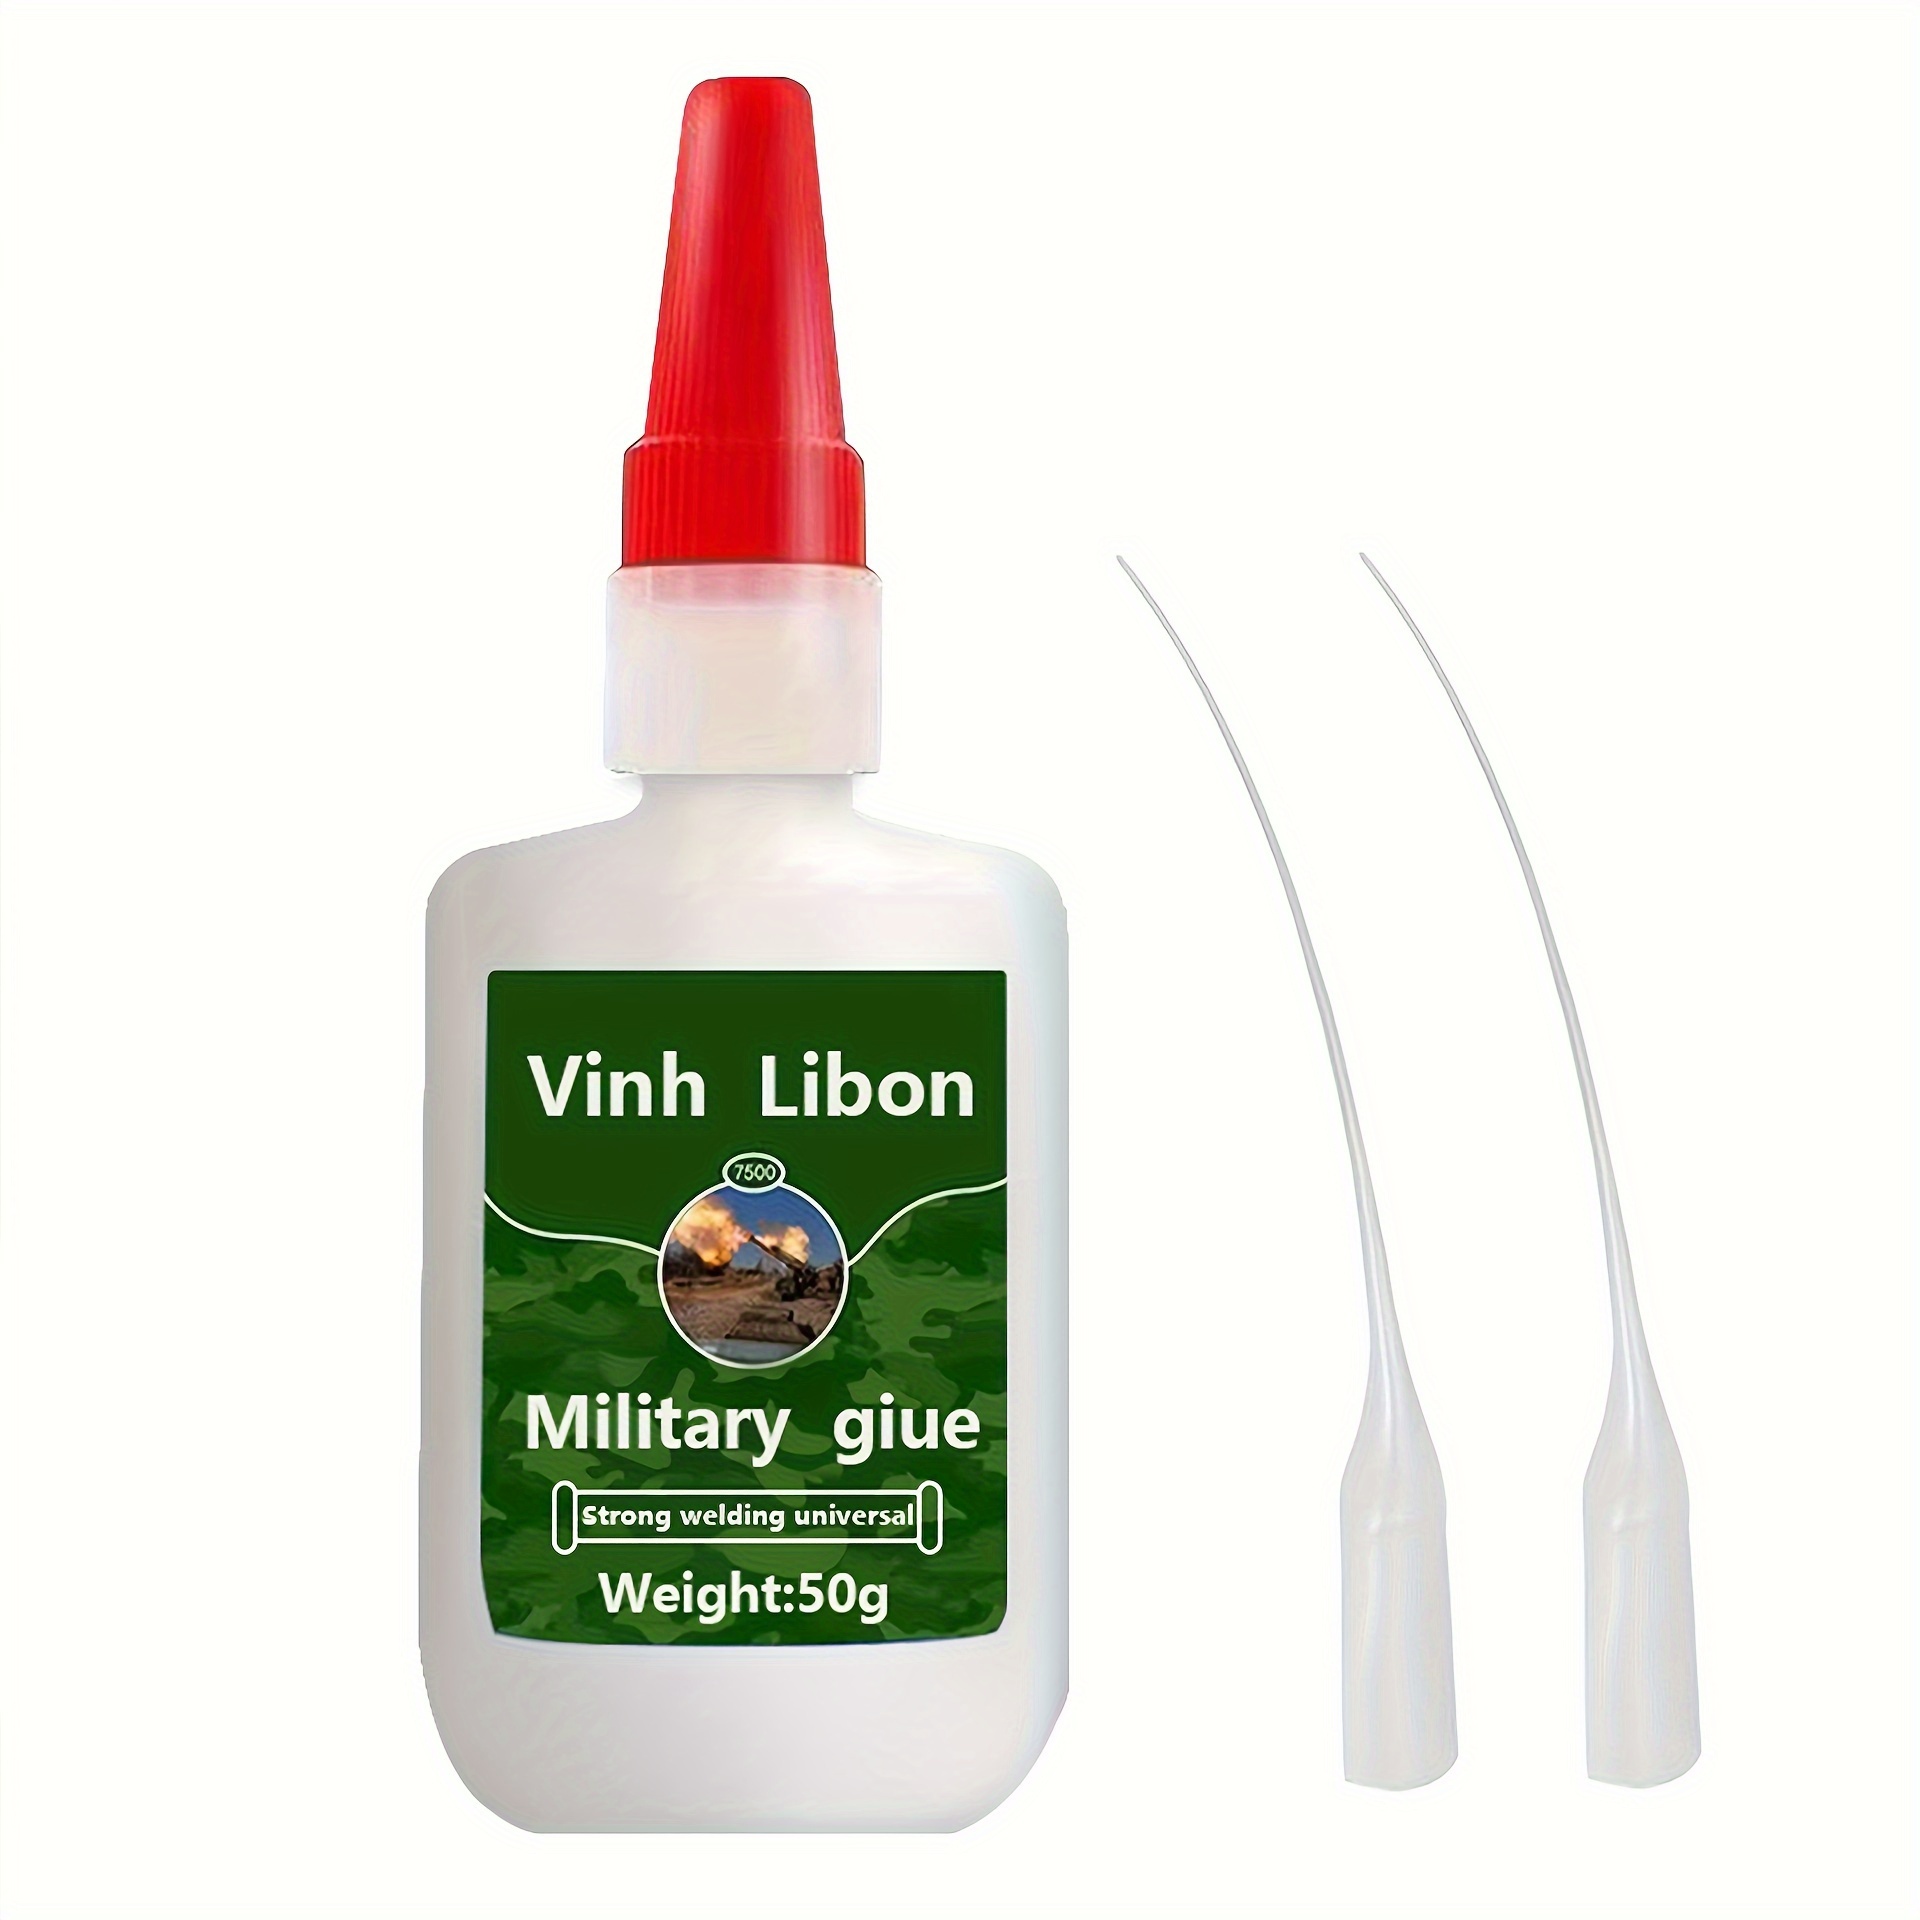 Mighty Universal Glue Multifunction Super Glue Strong Plastic Glue For  Resin Ceramic Metal With Durable Adhesive Power PVC Glue